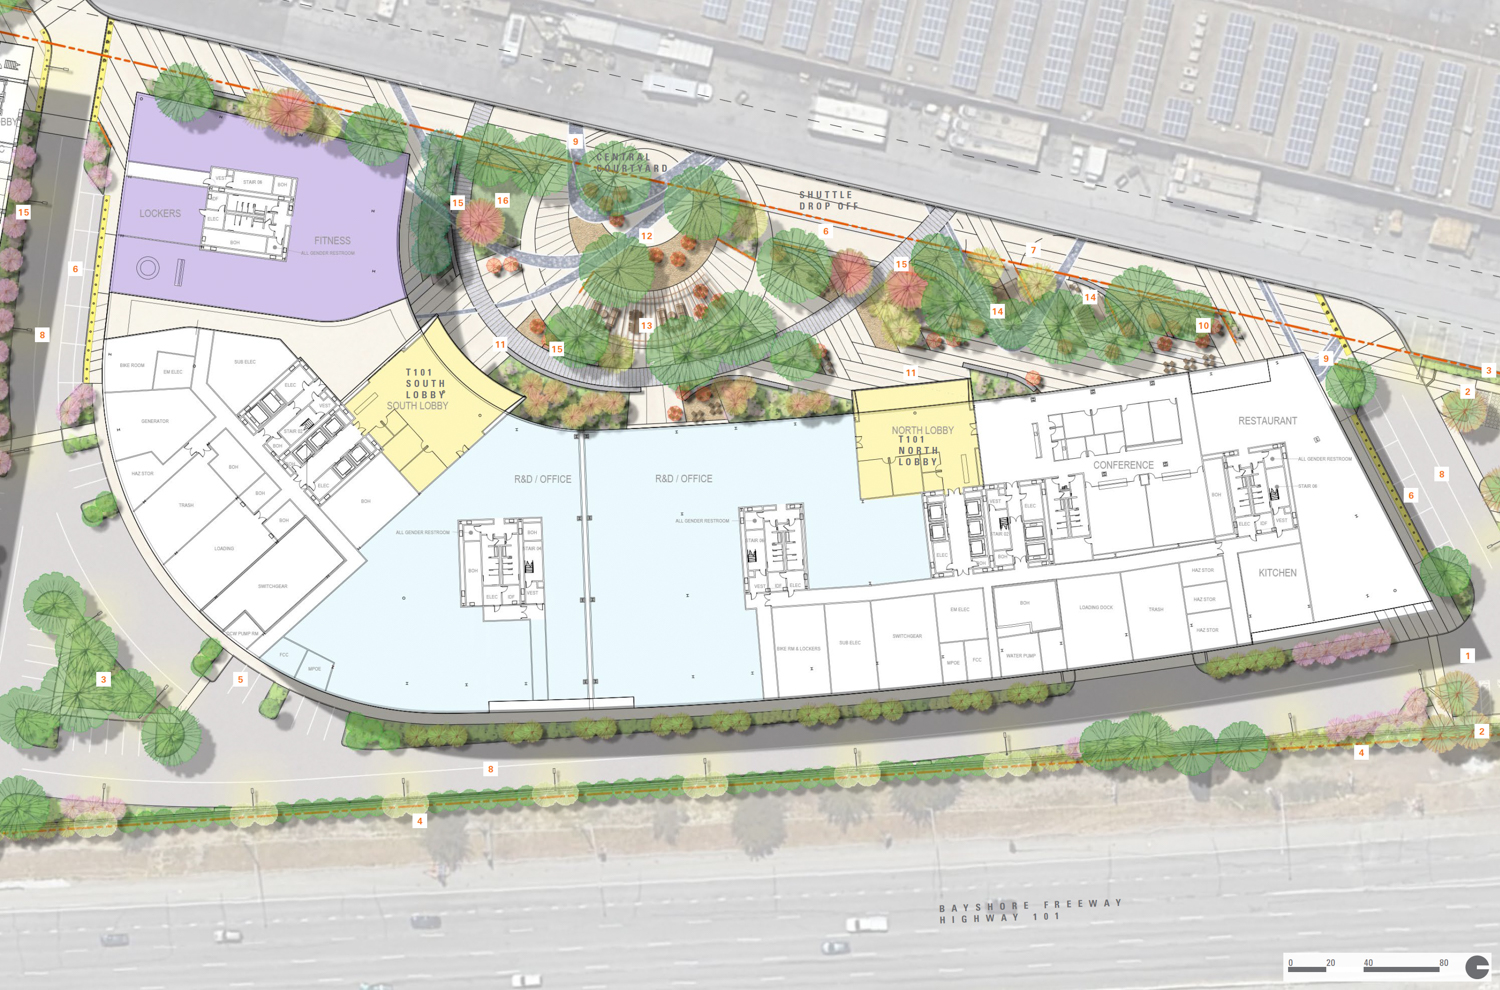 Terminal 101 site landscaping, illustration by Carducco Associates